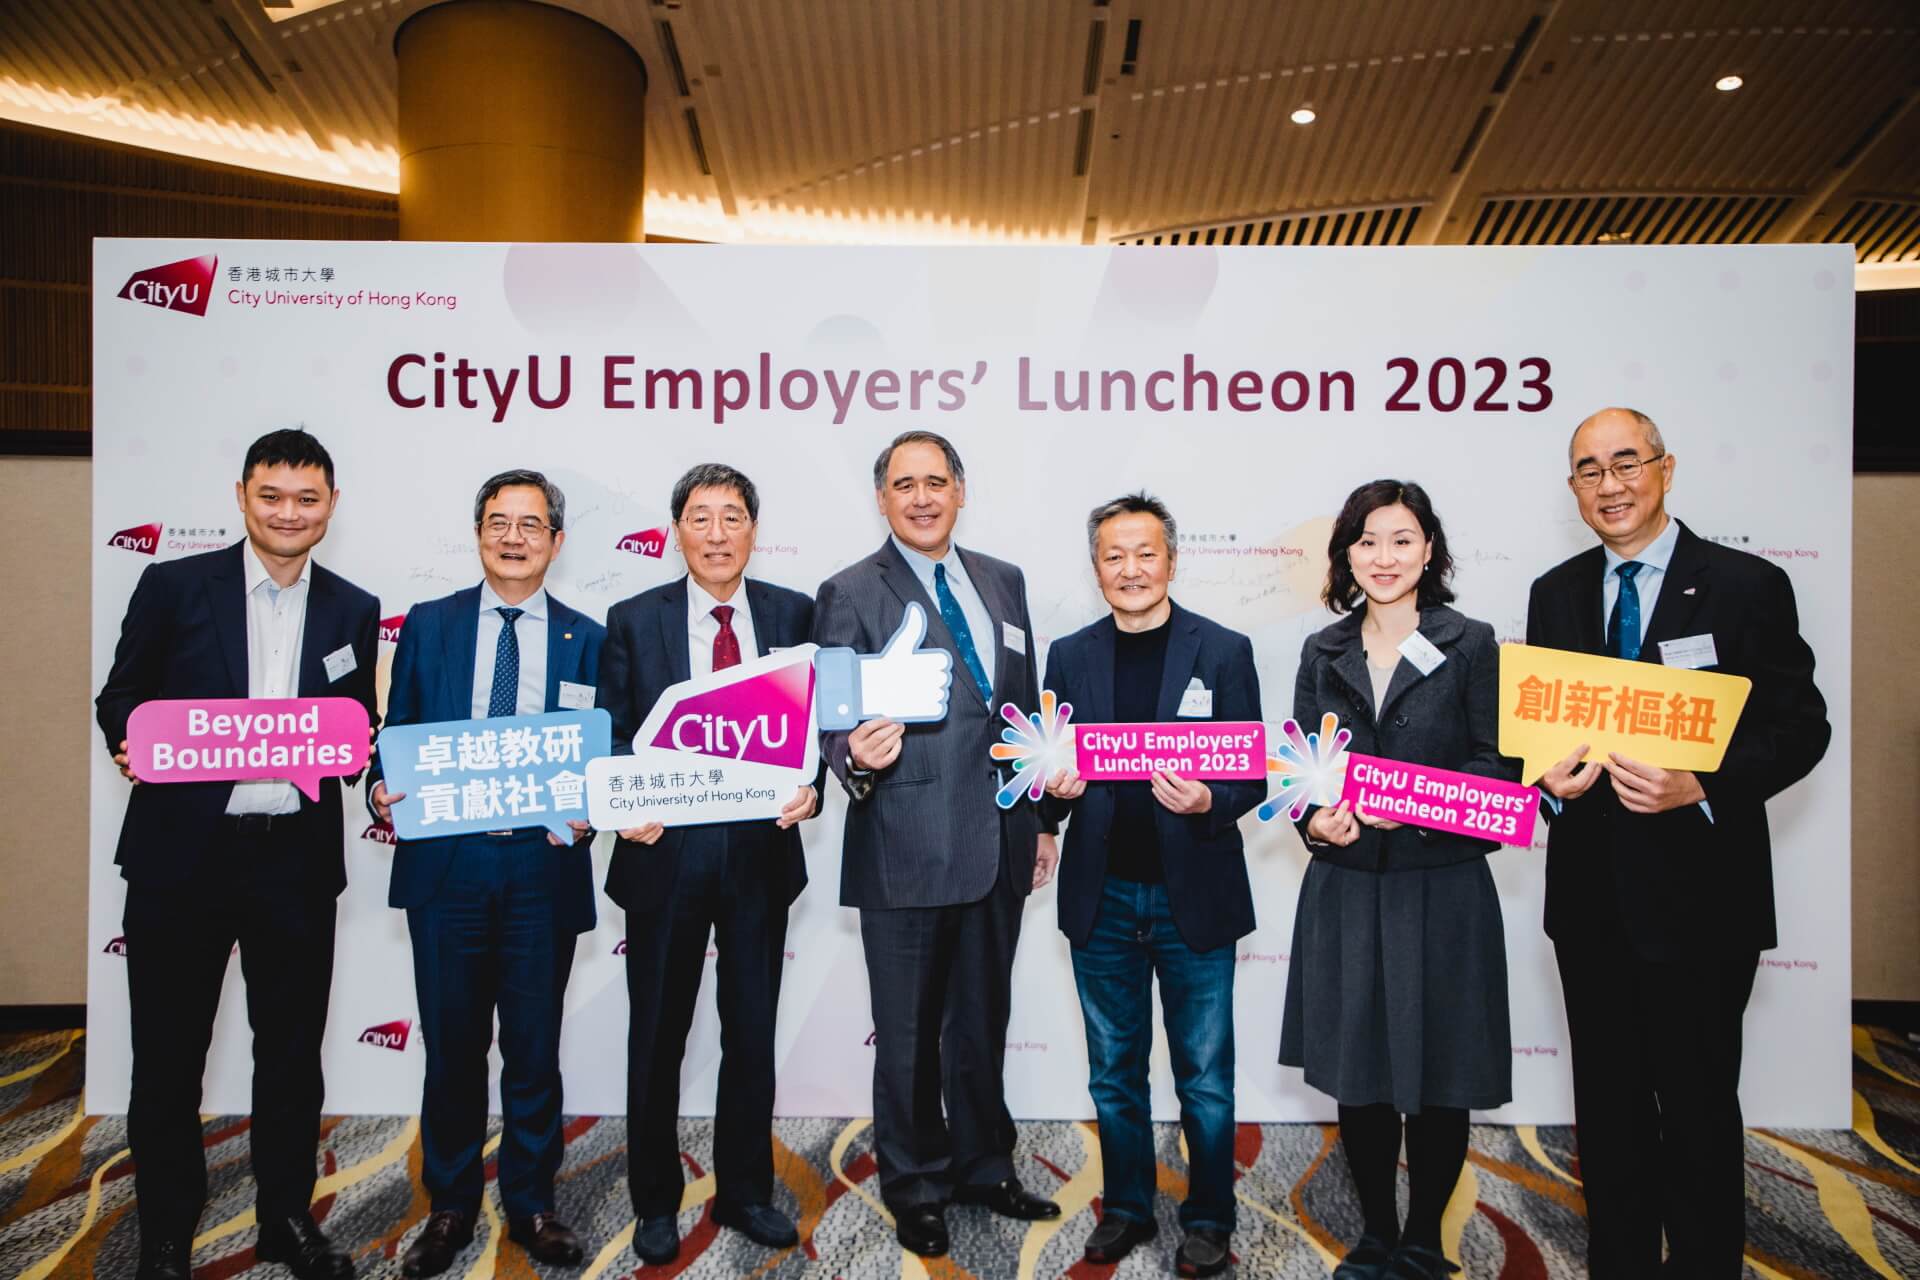 Mr Lester Garson HUANG, Chairman of the CityU Council, (centre) and President Way KUO (third from left) expressed their sincere appreciation to the representatives from various industries.